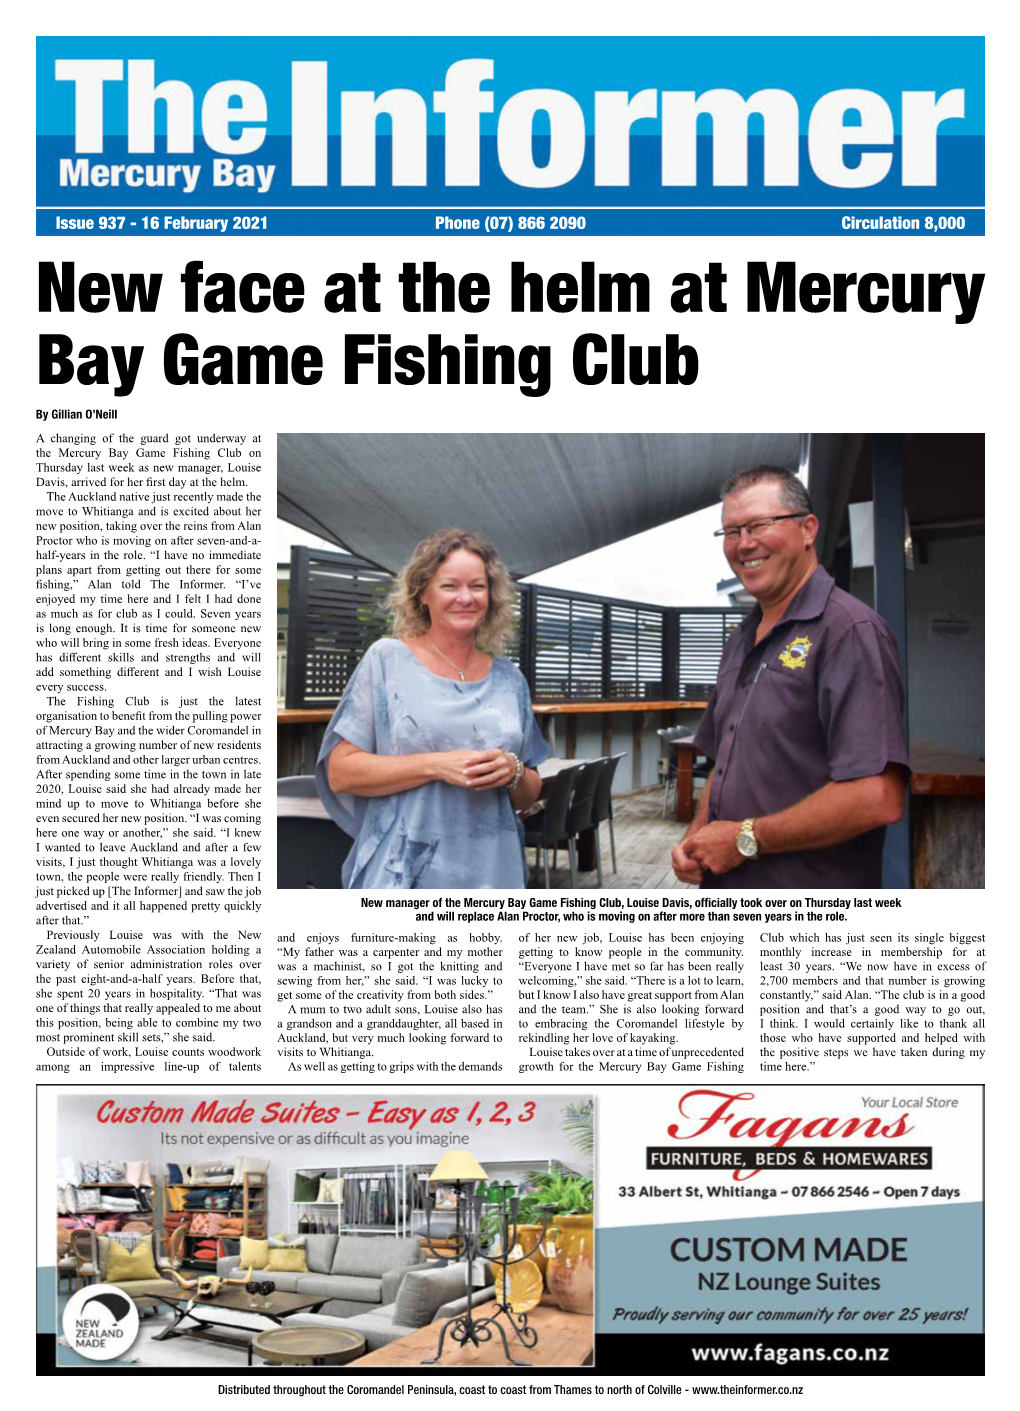 New Face at the Helm at Mercury Bay Game Fishing Club